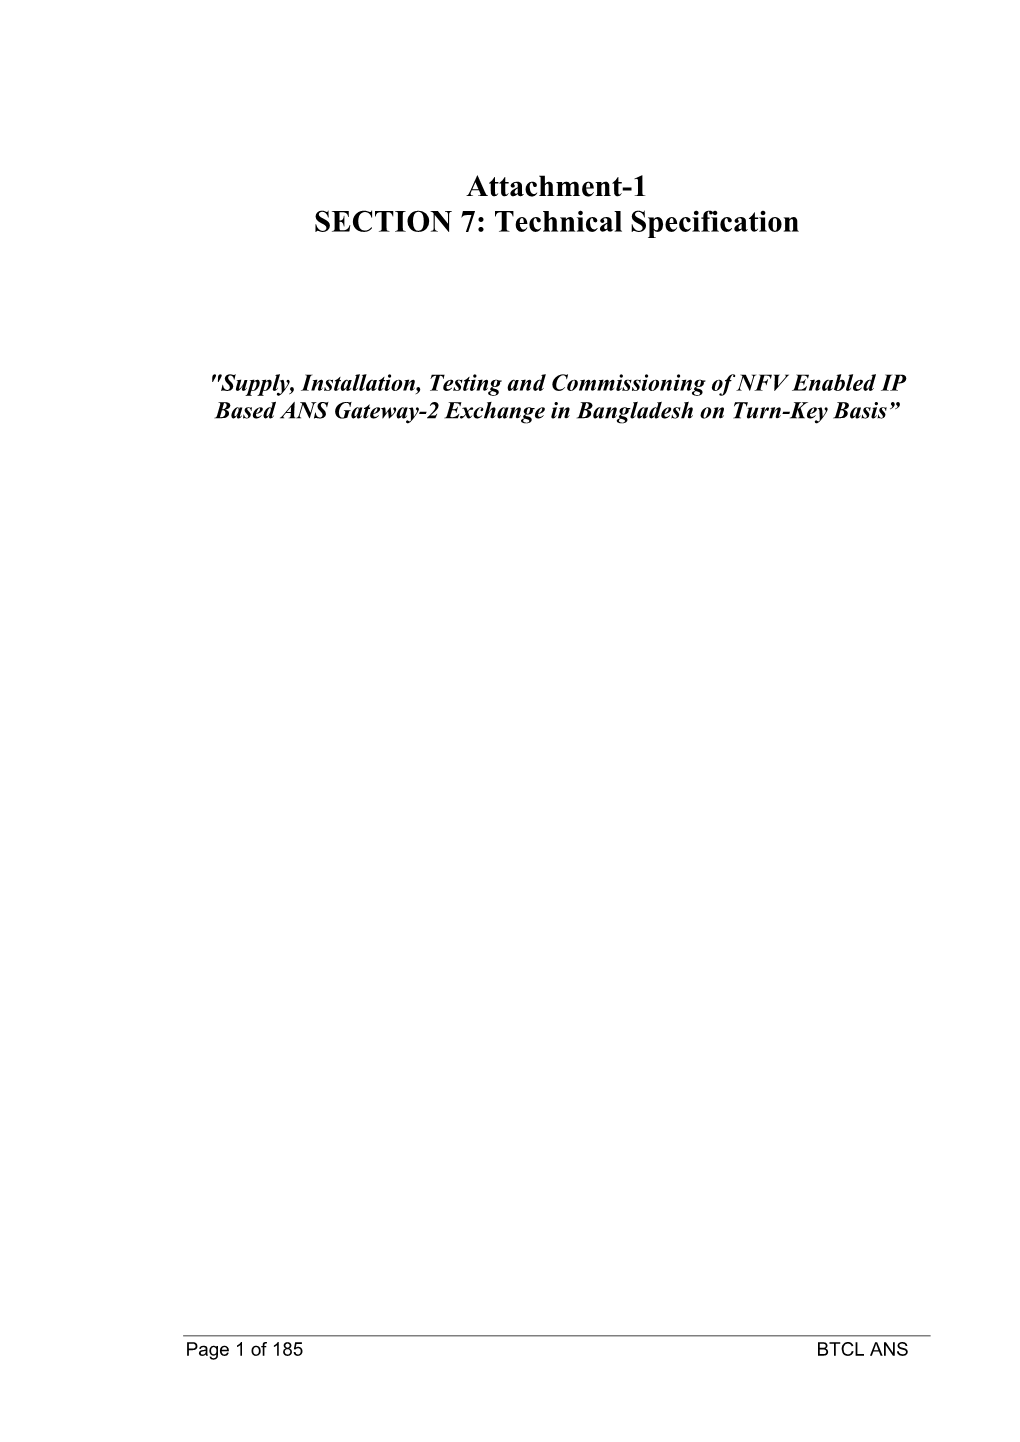 Attachment-1 SECTION 7: Technical Specification